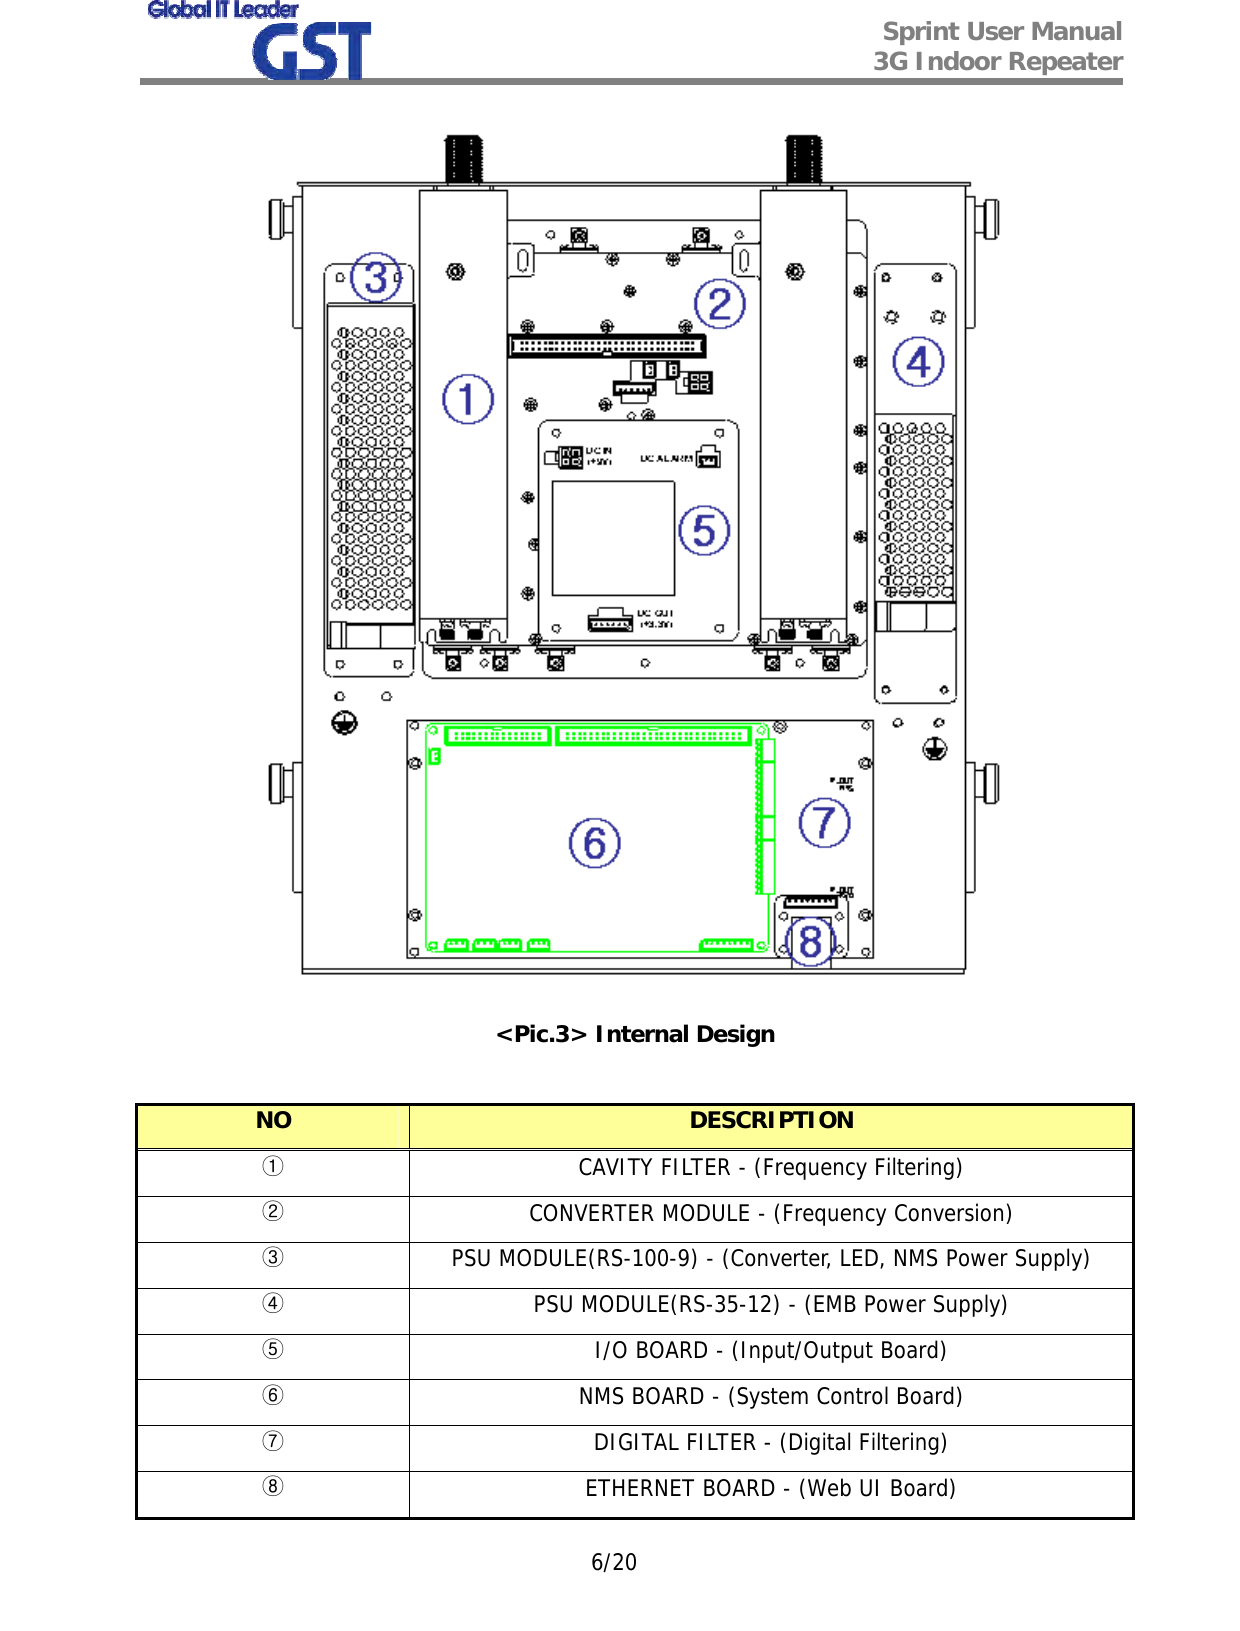  Sprint User Manual 3G Indoor Repeater   6/20  &lt;Pic.3&gt; Internal Design  NO  DESCRIPTION ① CAVITY FILTER - (Frequency Filtering) ② CONVERTER MODULE - (Frequency Conversion) ③ PSU MODULE(RS-100-9) - (Converter, LED, NMS Power Supply) ④ PSU MODULE(RS-35-12) - (EMB Power Supply) ⑤ I/O BOARD - (Input/Output Board) ⑥ NMS BOARD - (System Control Board) ⑦ DIGITAL FILTER - (Digital Filtering) ⑧ ETHERNET BOARD - (Web UI Board) 